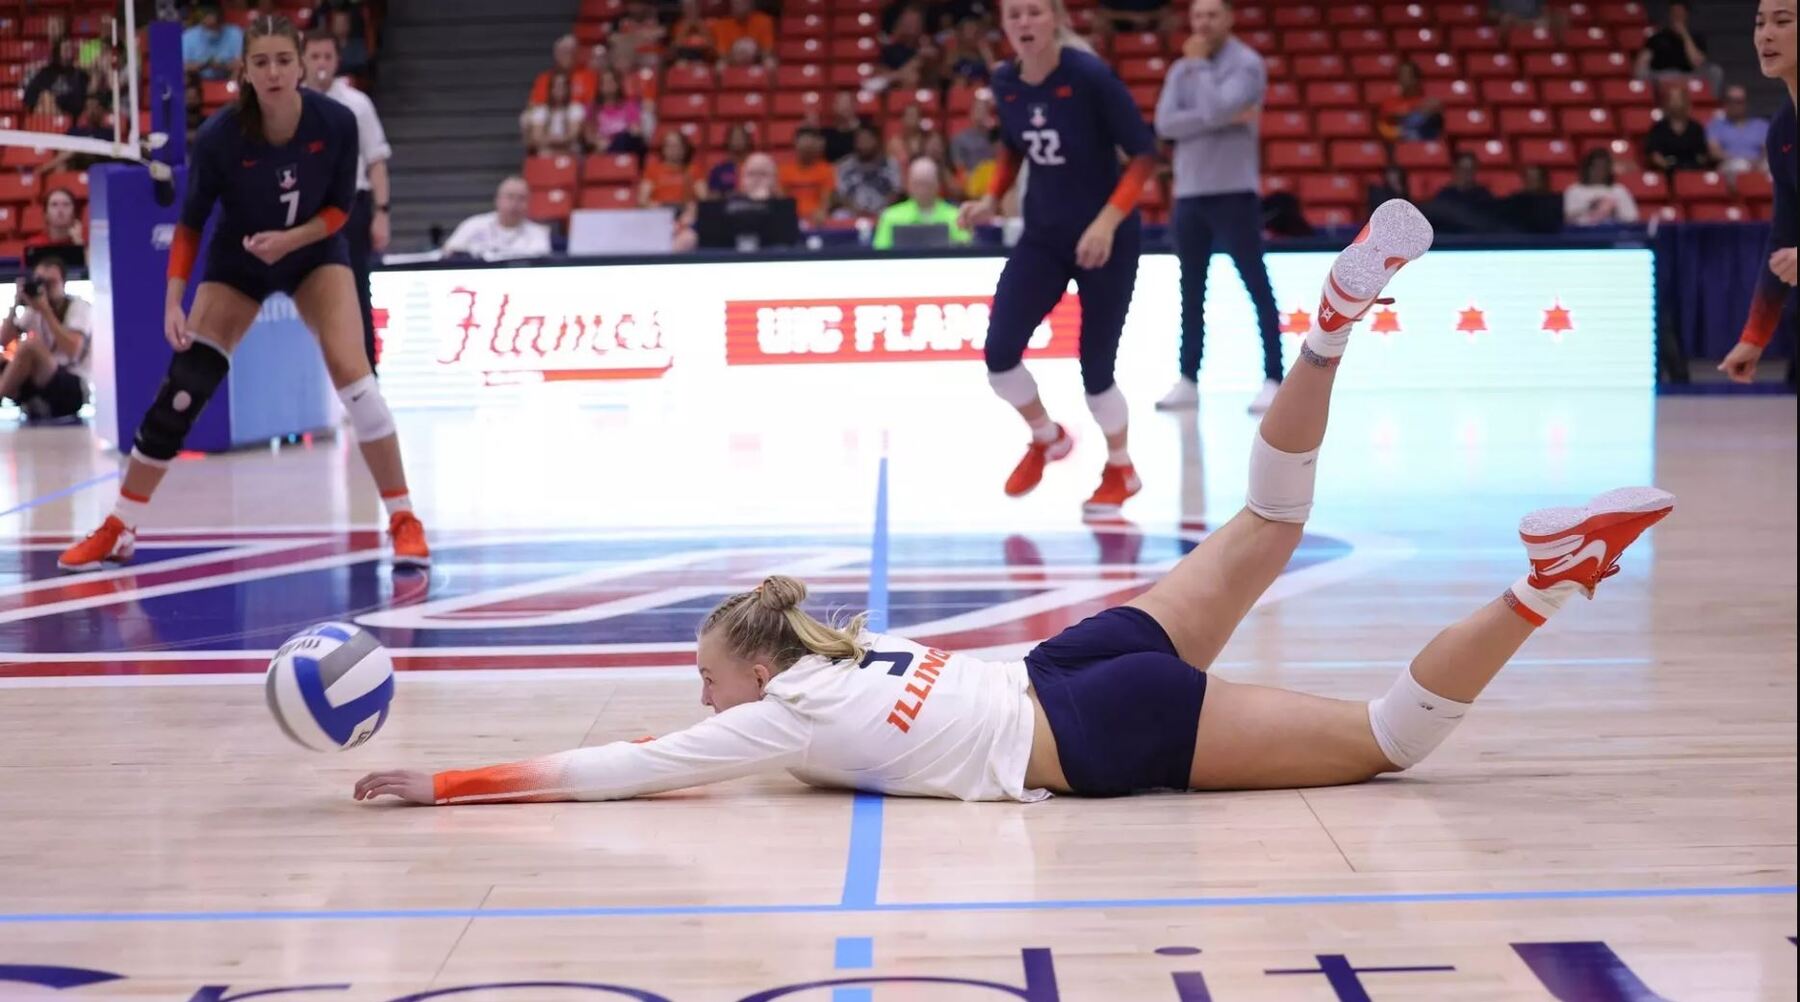 Illini freshman Lily Barry dives for a ball on the court at UIC